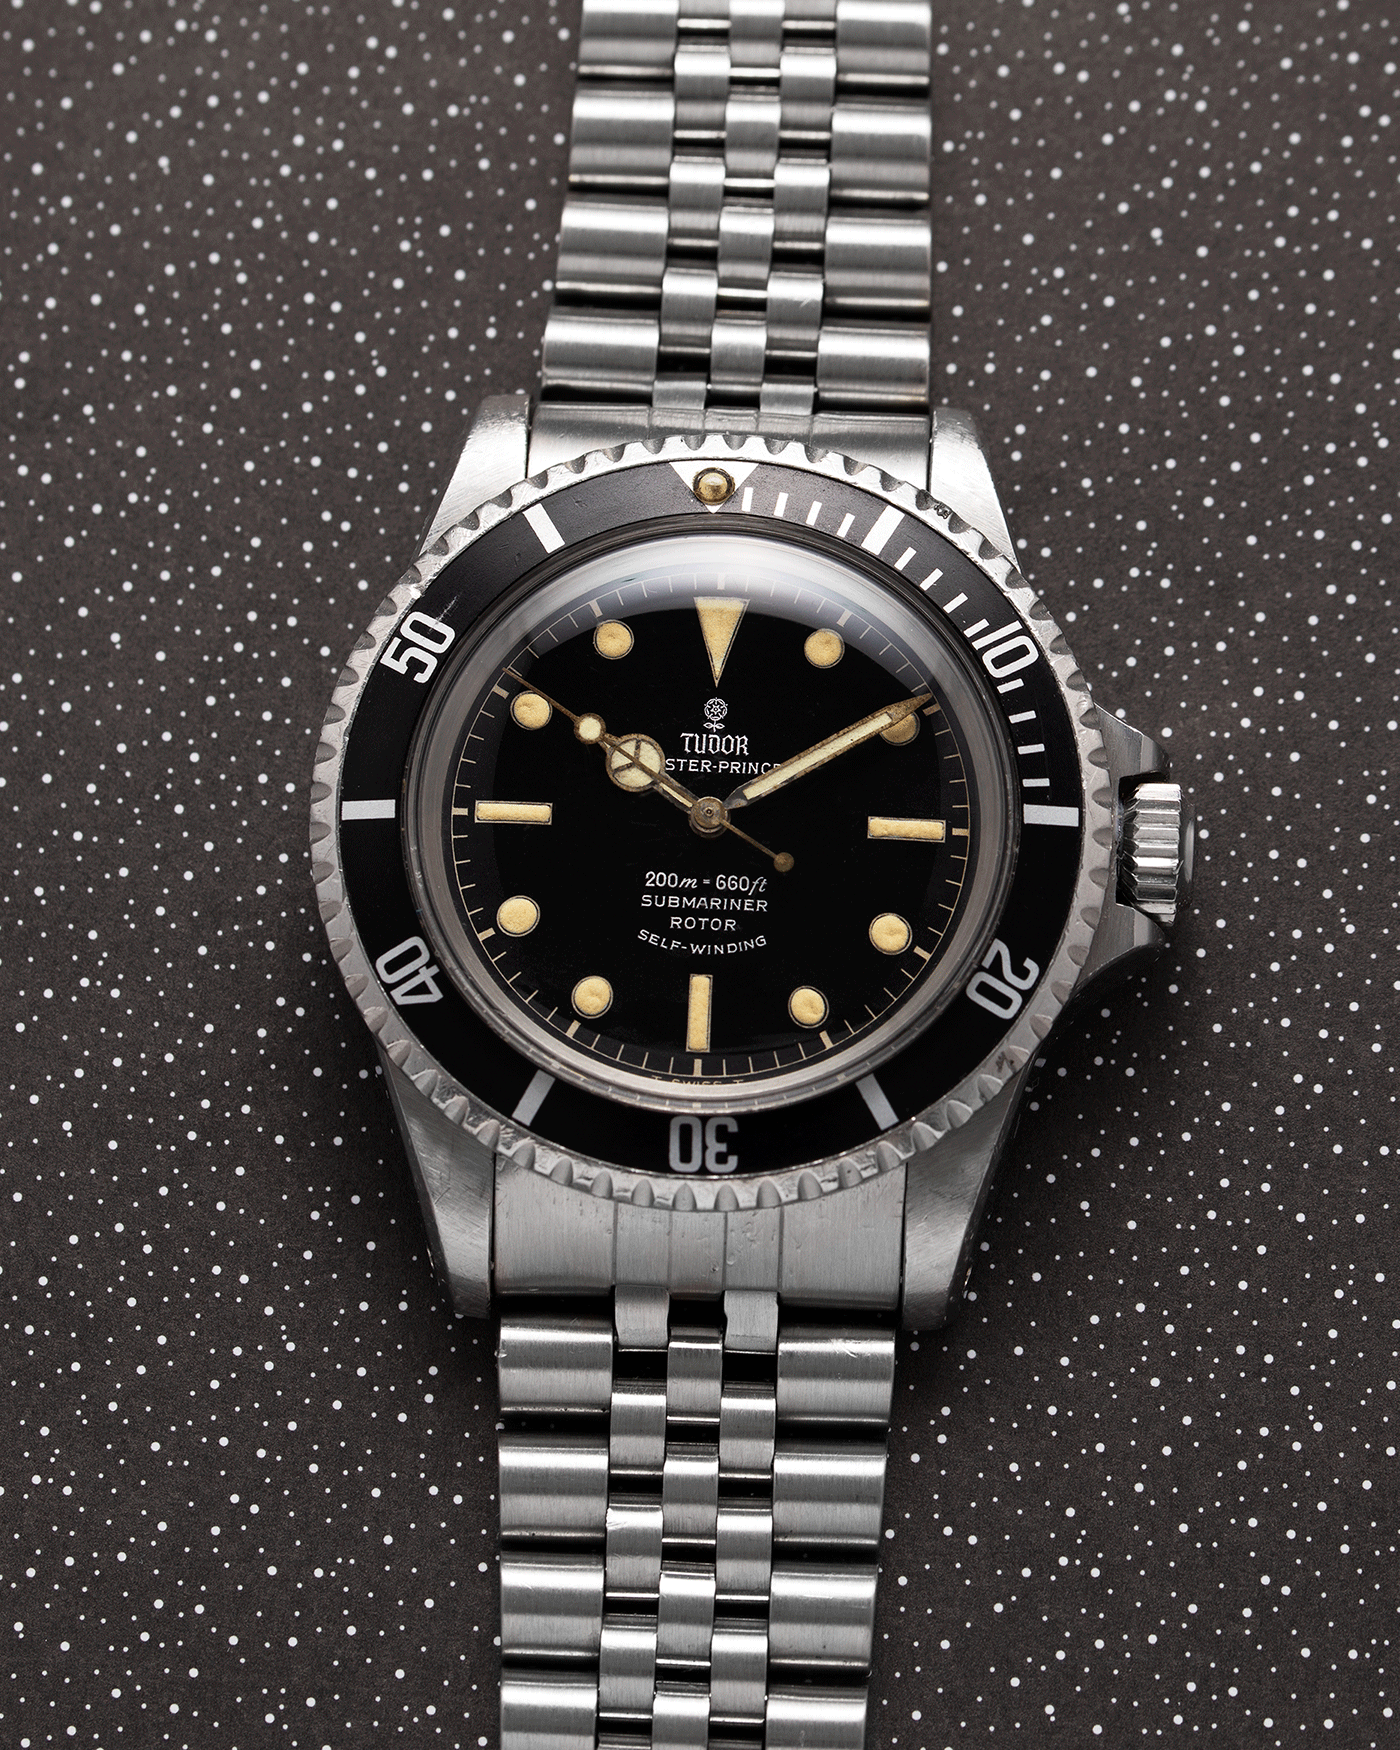 Brand: Tudor Year: 56XXXX Model: Submariner Reference Number: 7928 Serial Number: 1966 Material: Stainless Steel Movement: Cal. 390 Case Diameter: 39mm Lug Width: 20mm Bracelet: Rolex 62510H Jubilee with 555B End Links